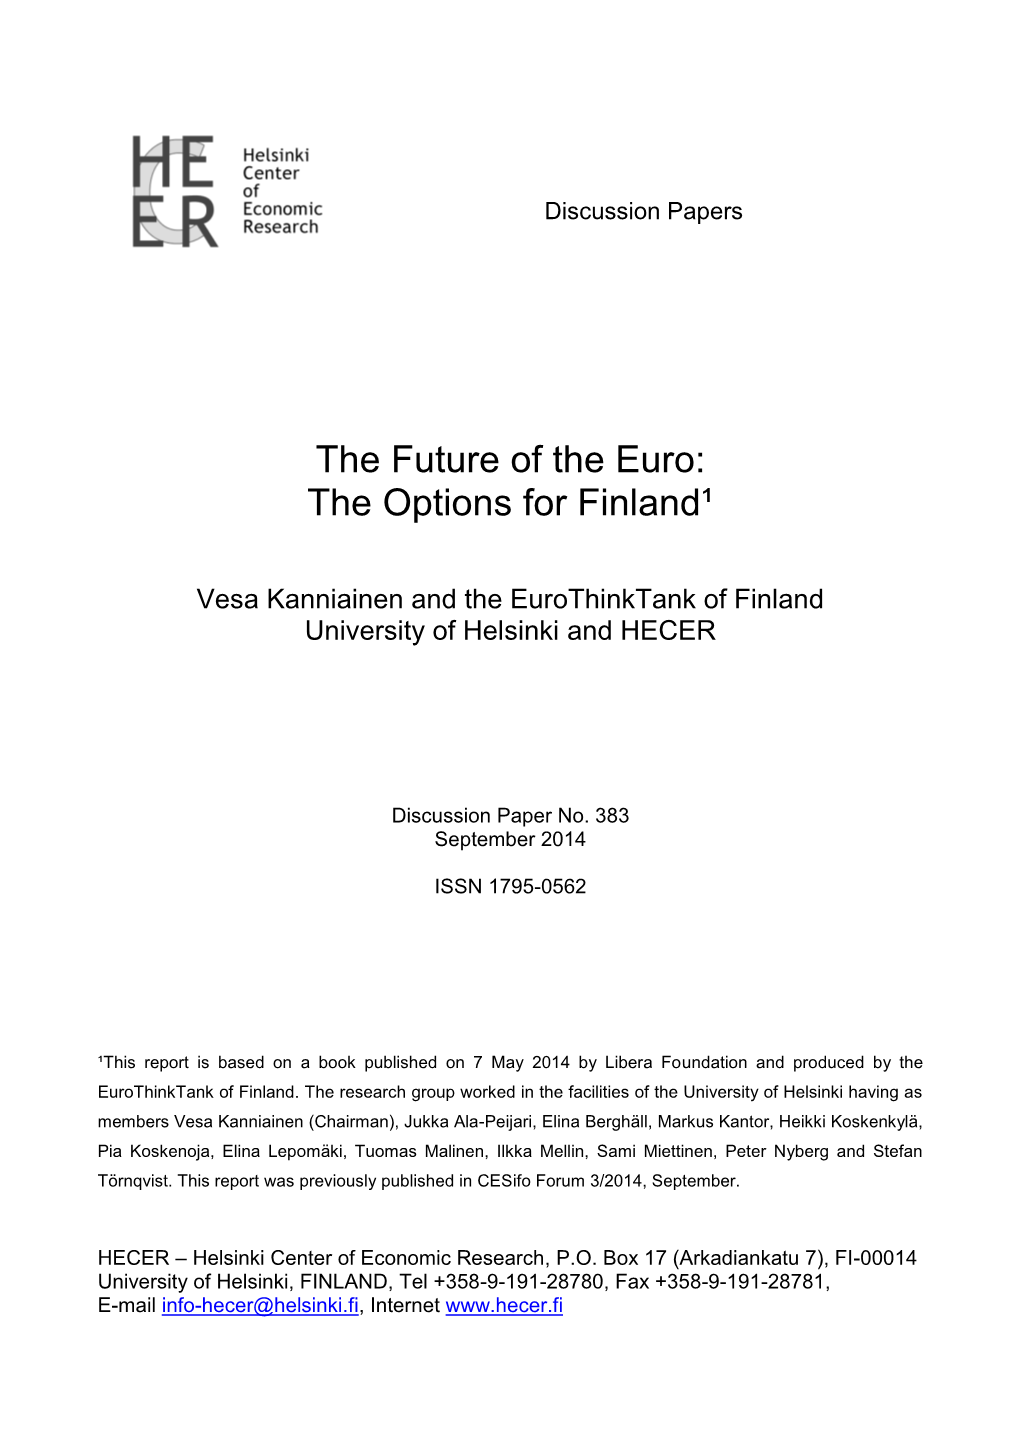 The Future of the Euro: the Options for Finland¹